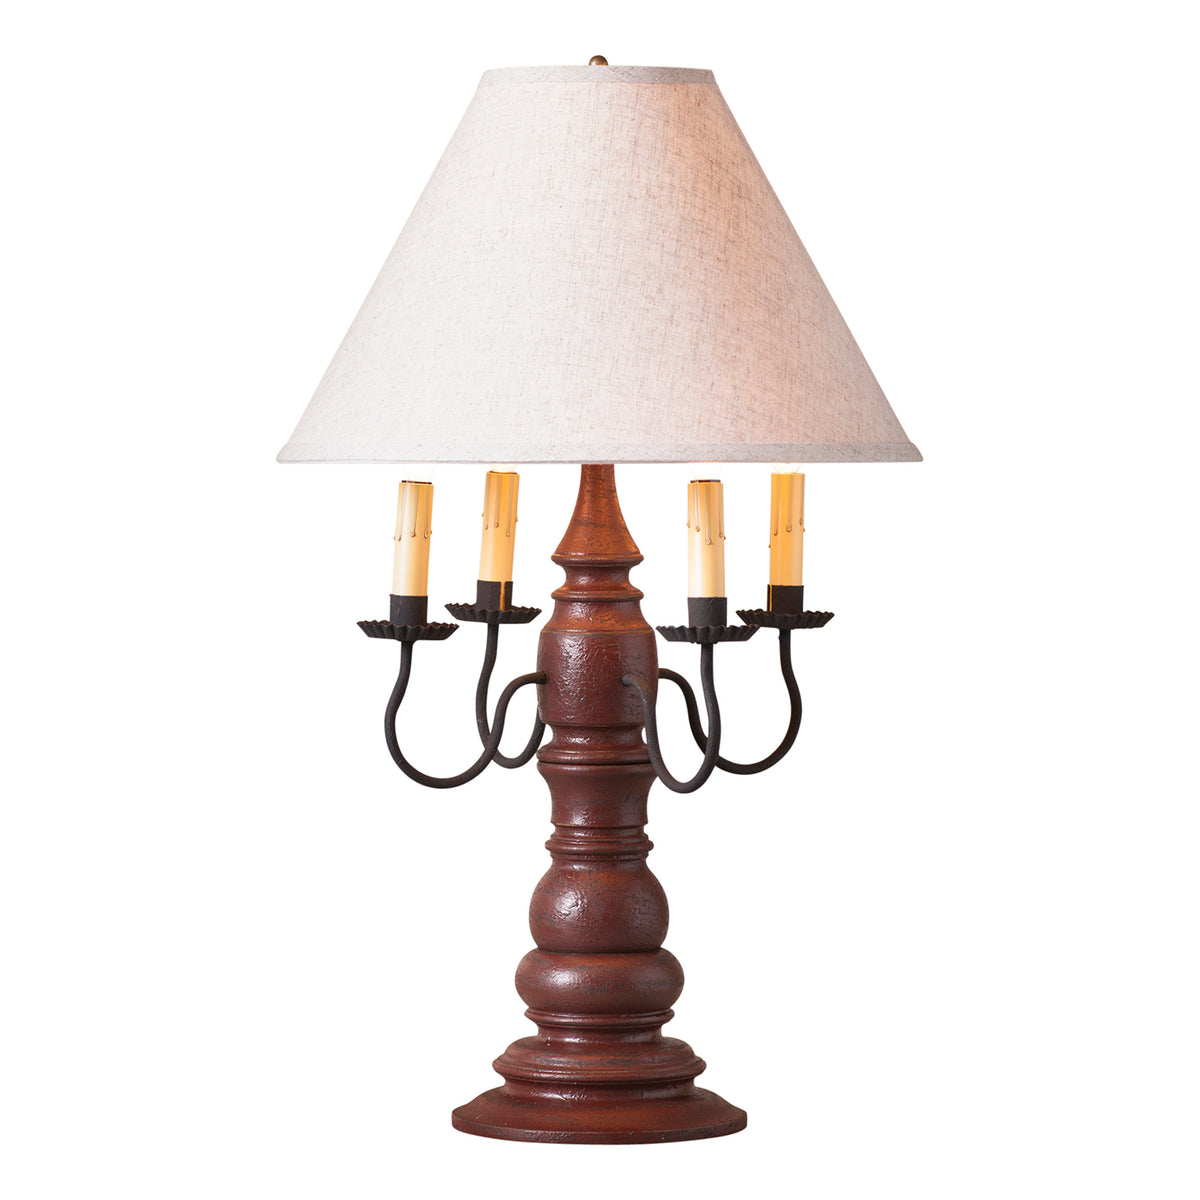 Bradford Lamp in Americana Red with Linen Ivory Shade